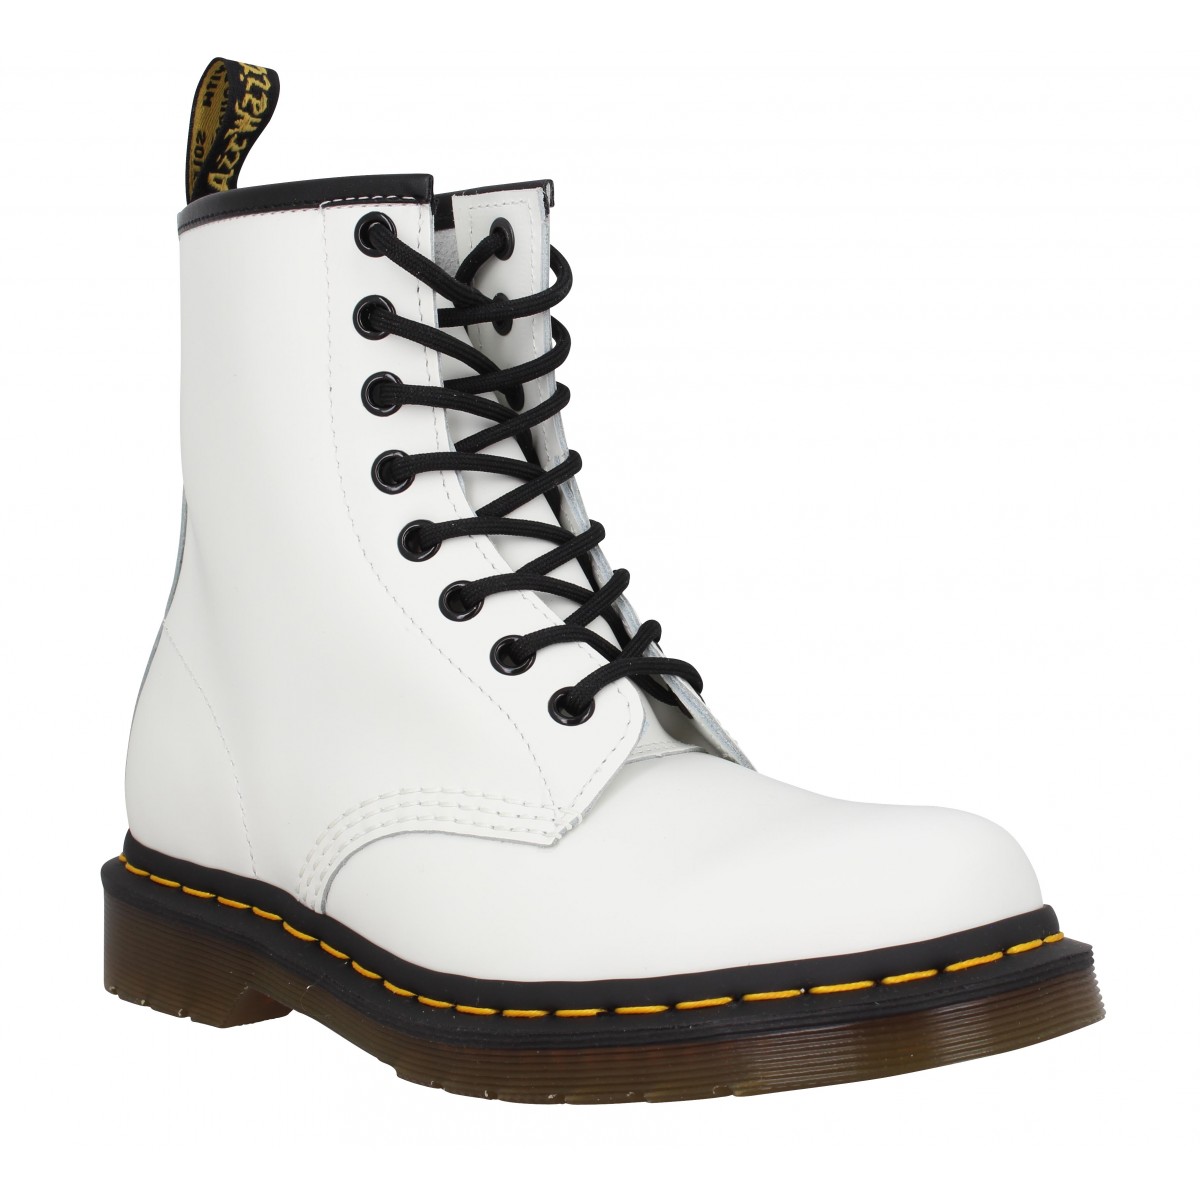 diamond Fifth Appeal to be attractive Dr martens 1460 cuir smooth femme blanc femme | Fanny chaussures